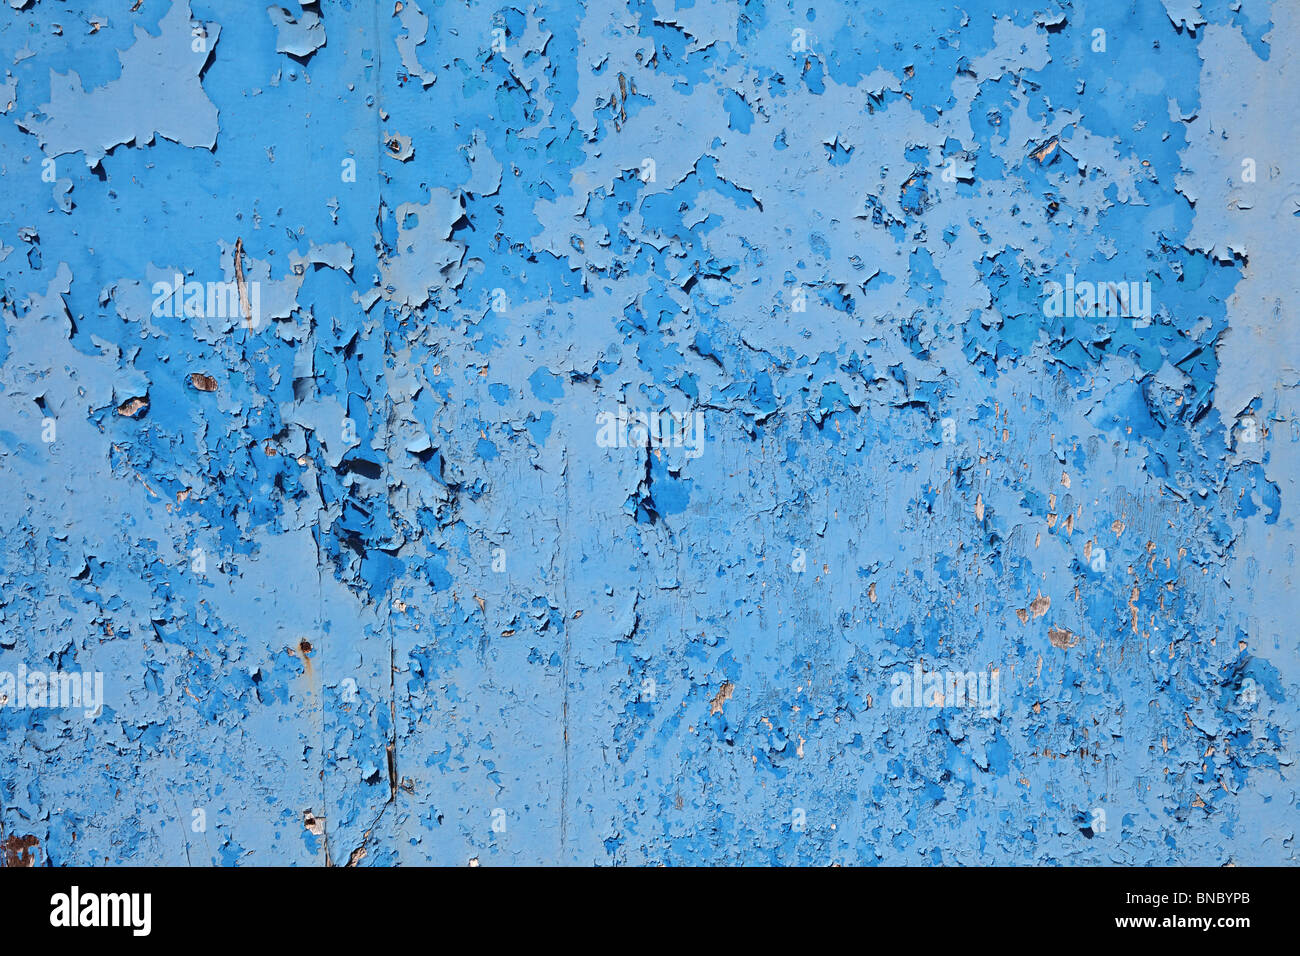 Old grungy blue paint on wooden surface Stock Photo